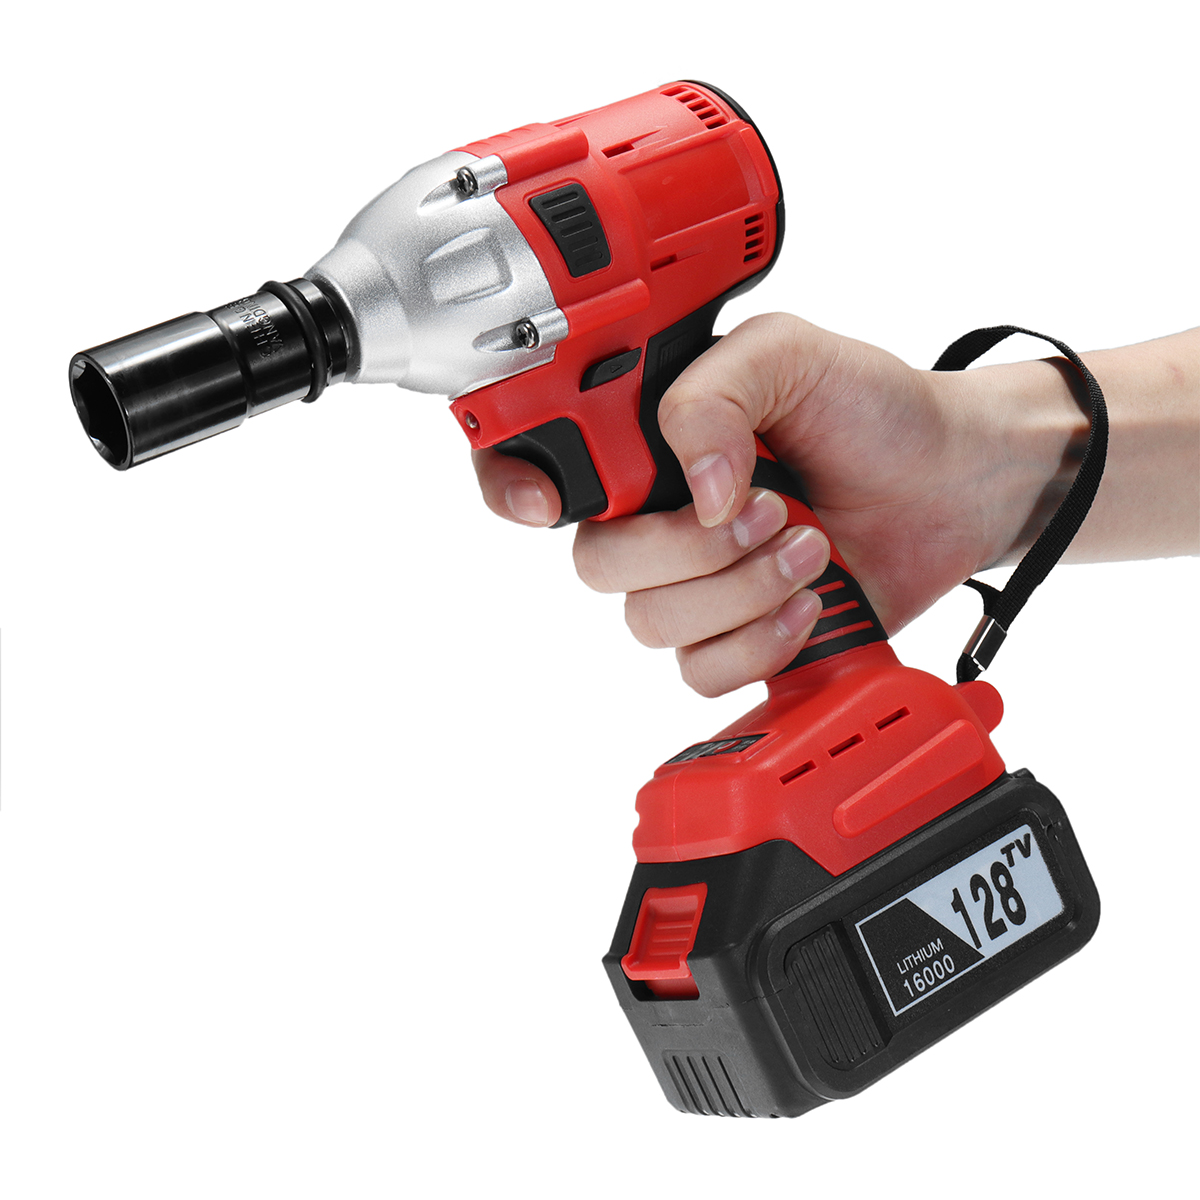 320NM-Brushless-Electric-Impact-Wrench-Socket-Wrench-with-Lithium-Battery--Charger-1374951-8